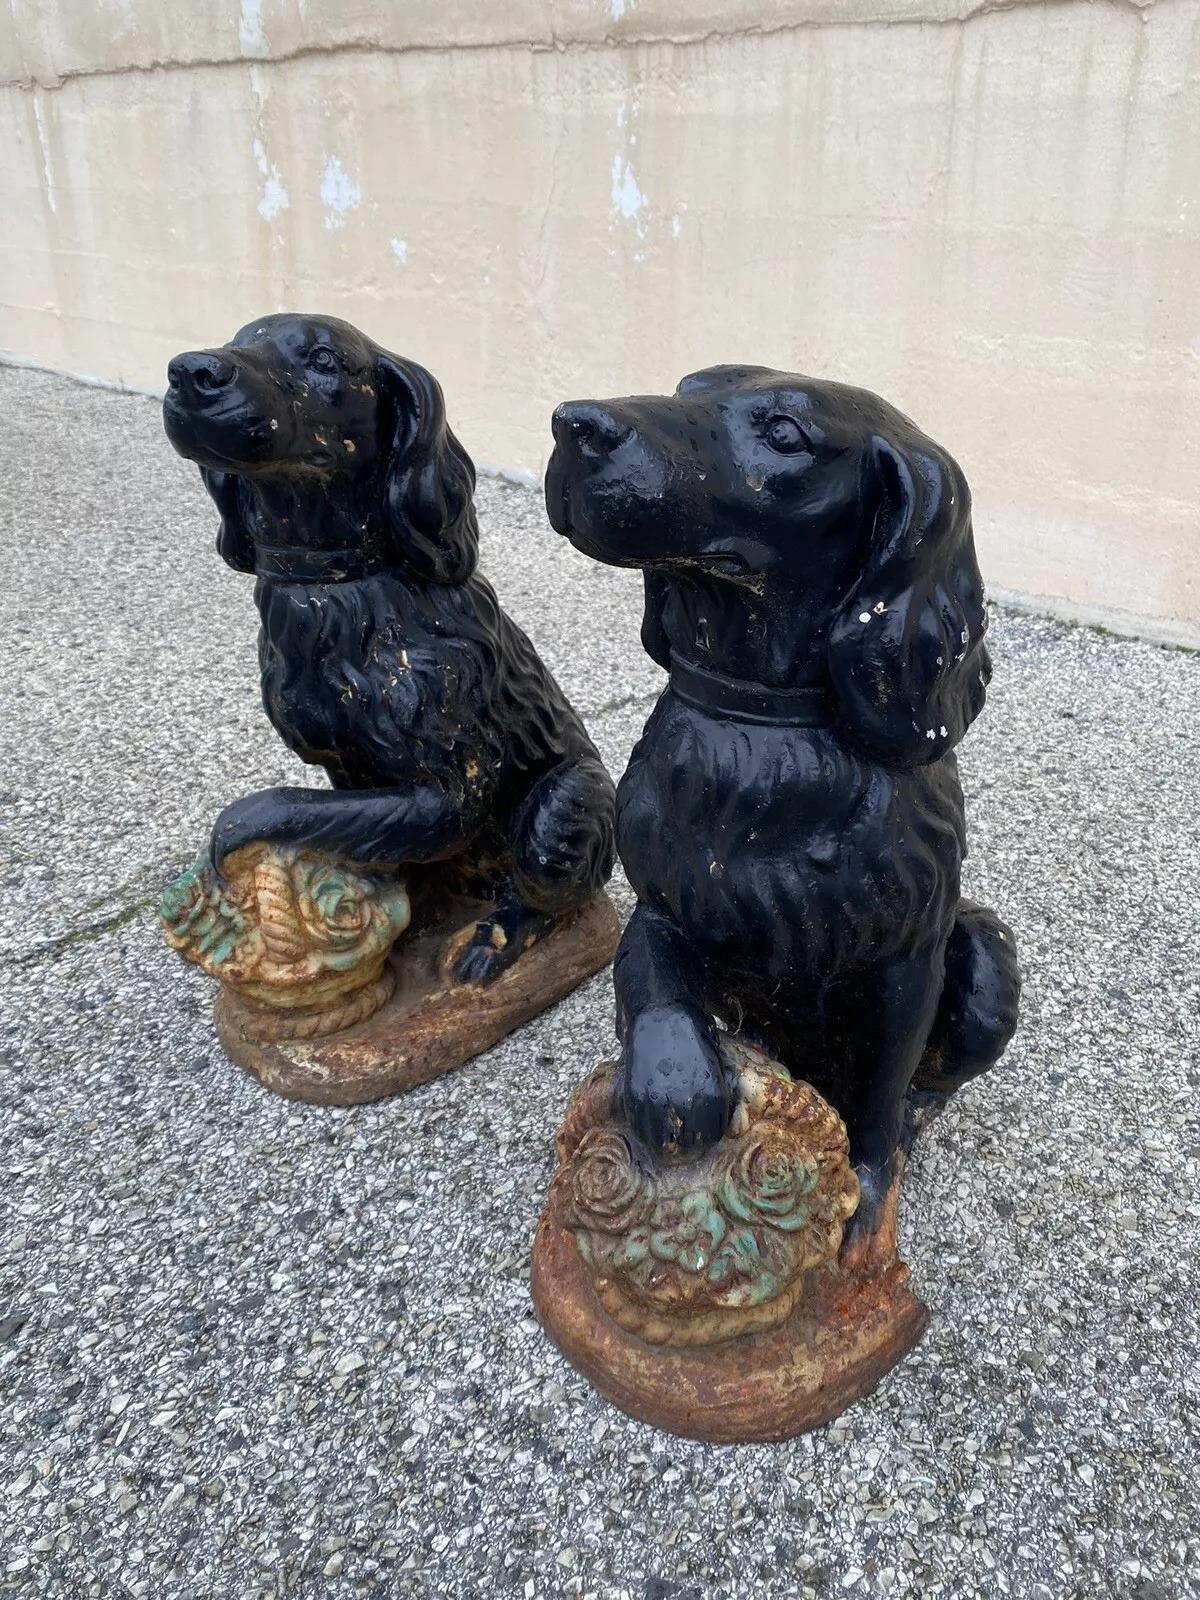 Antique Cast Iron Victorian Seated Golden Retriever Dog Guardian Outdoor Entry Statue - Right and Left Facing Pair. Item features right and left facing, paw resting on floral bouquet, black painted finish, Approx 120 lbs each. Circa Early to Mid